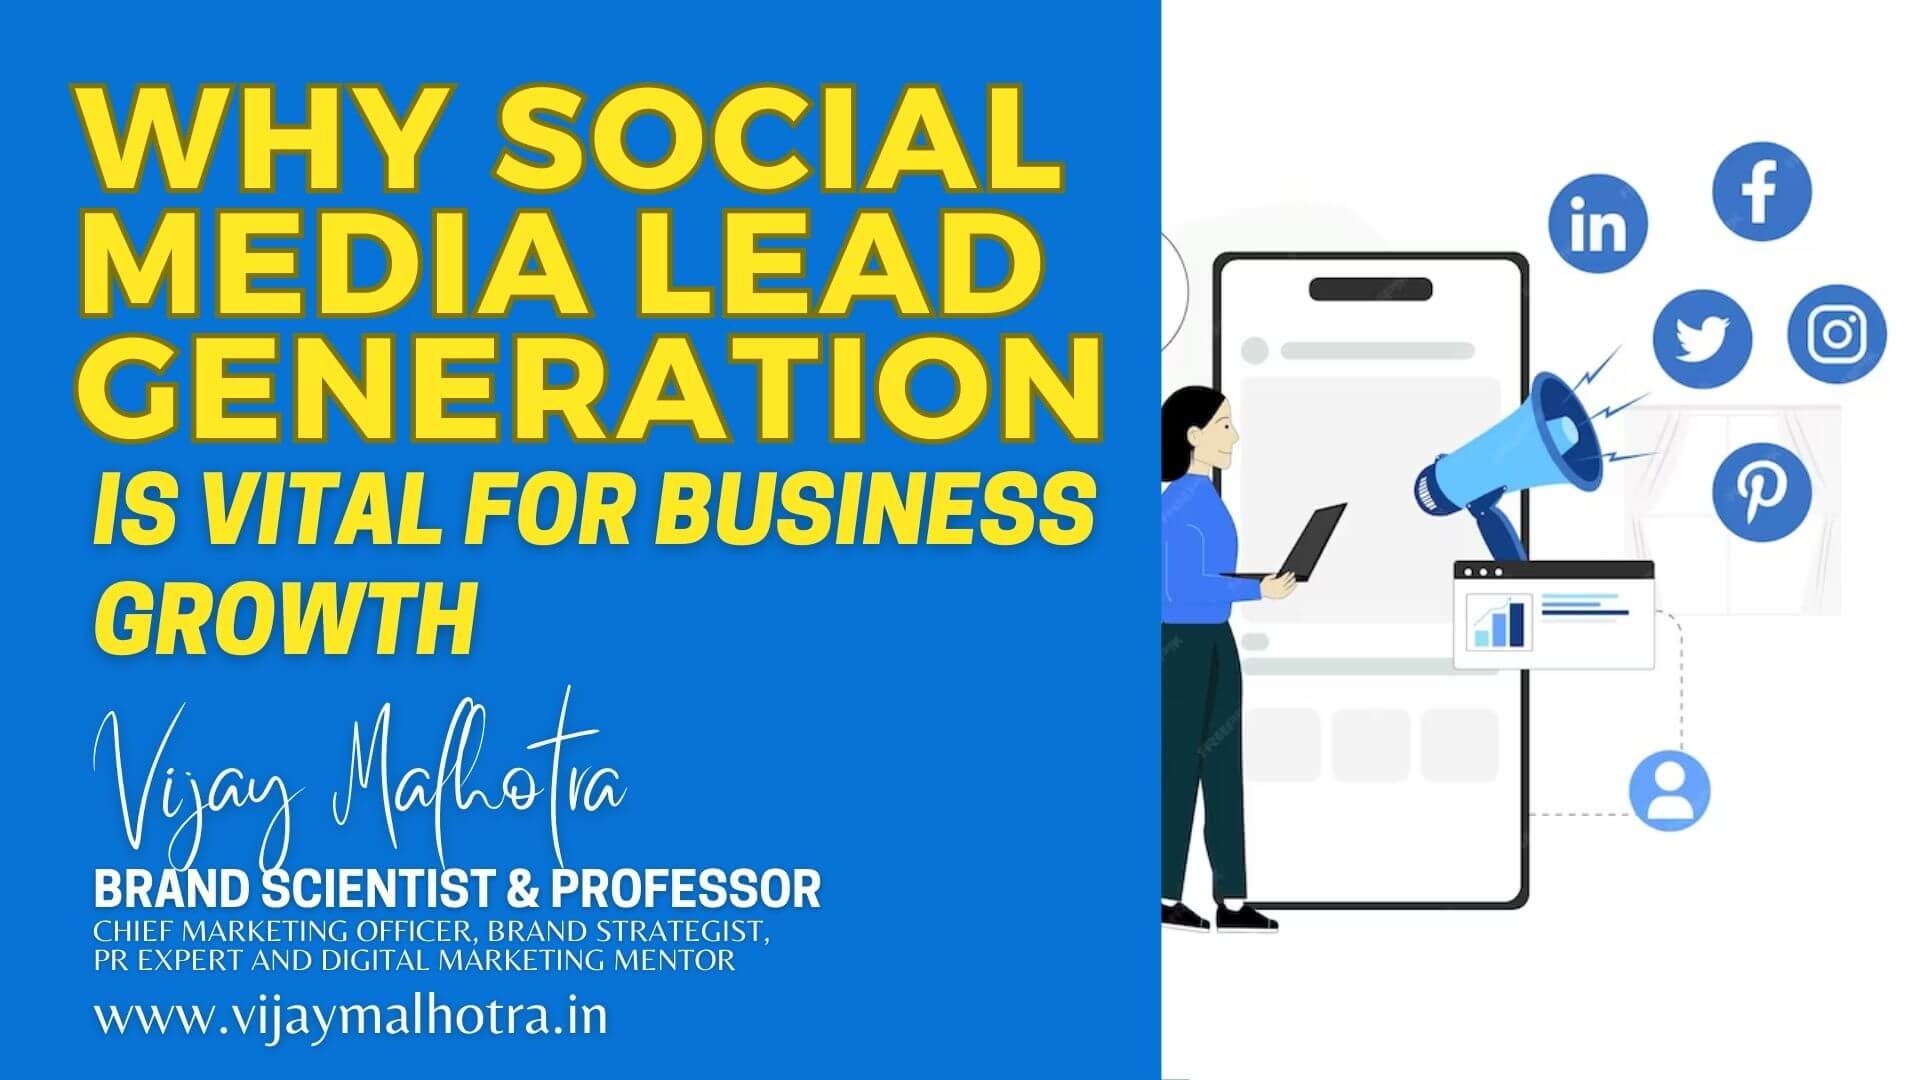 Vijay Malhotra emphasizes the importance of social media lead generation for business growth